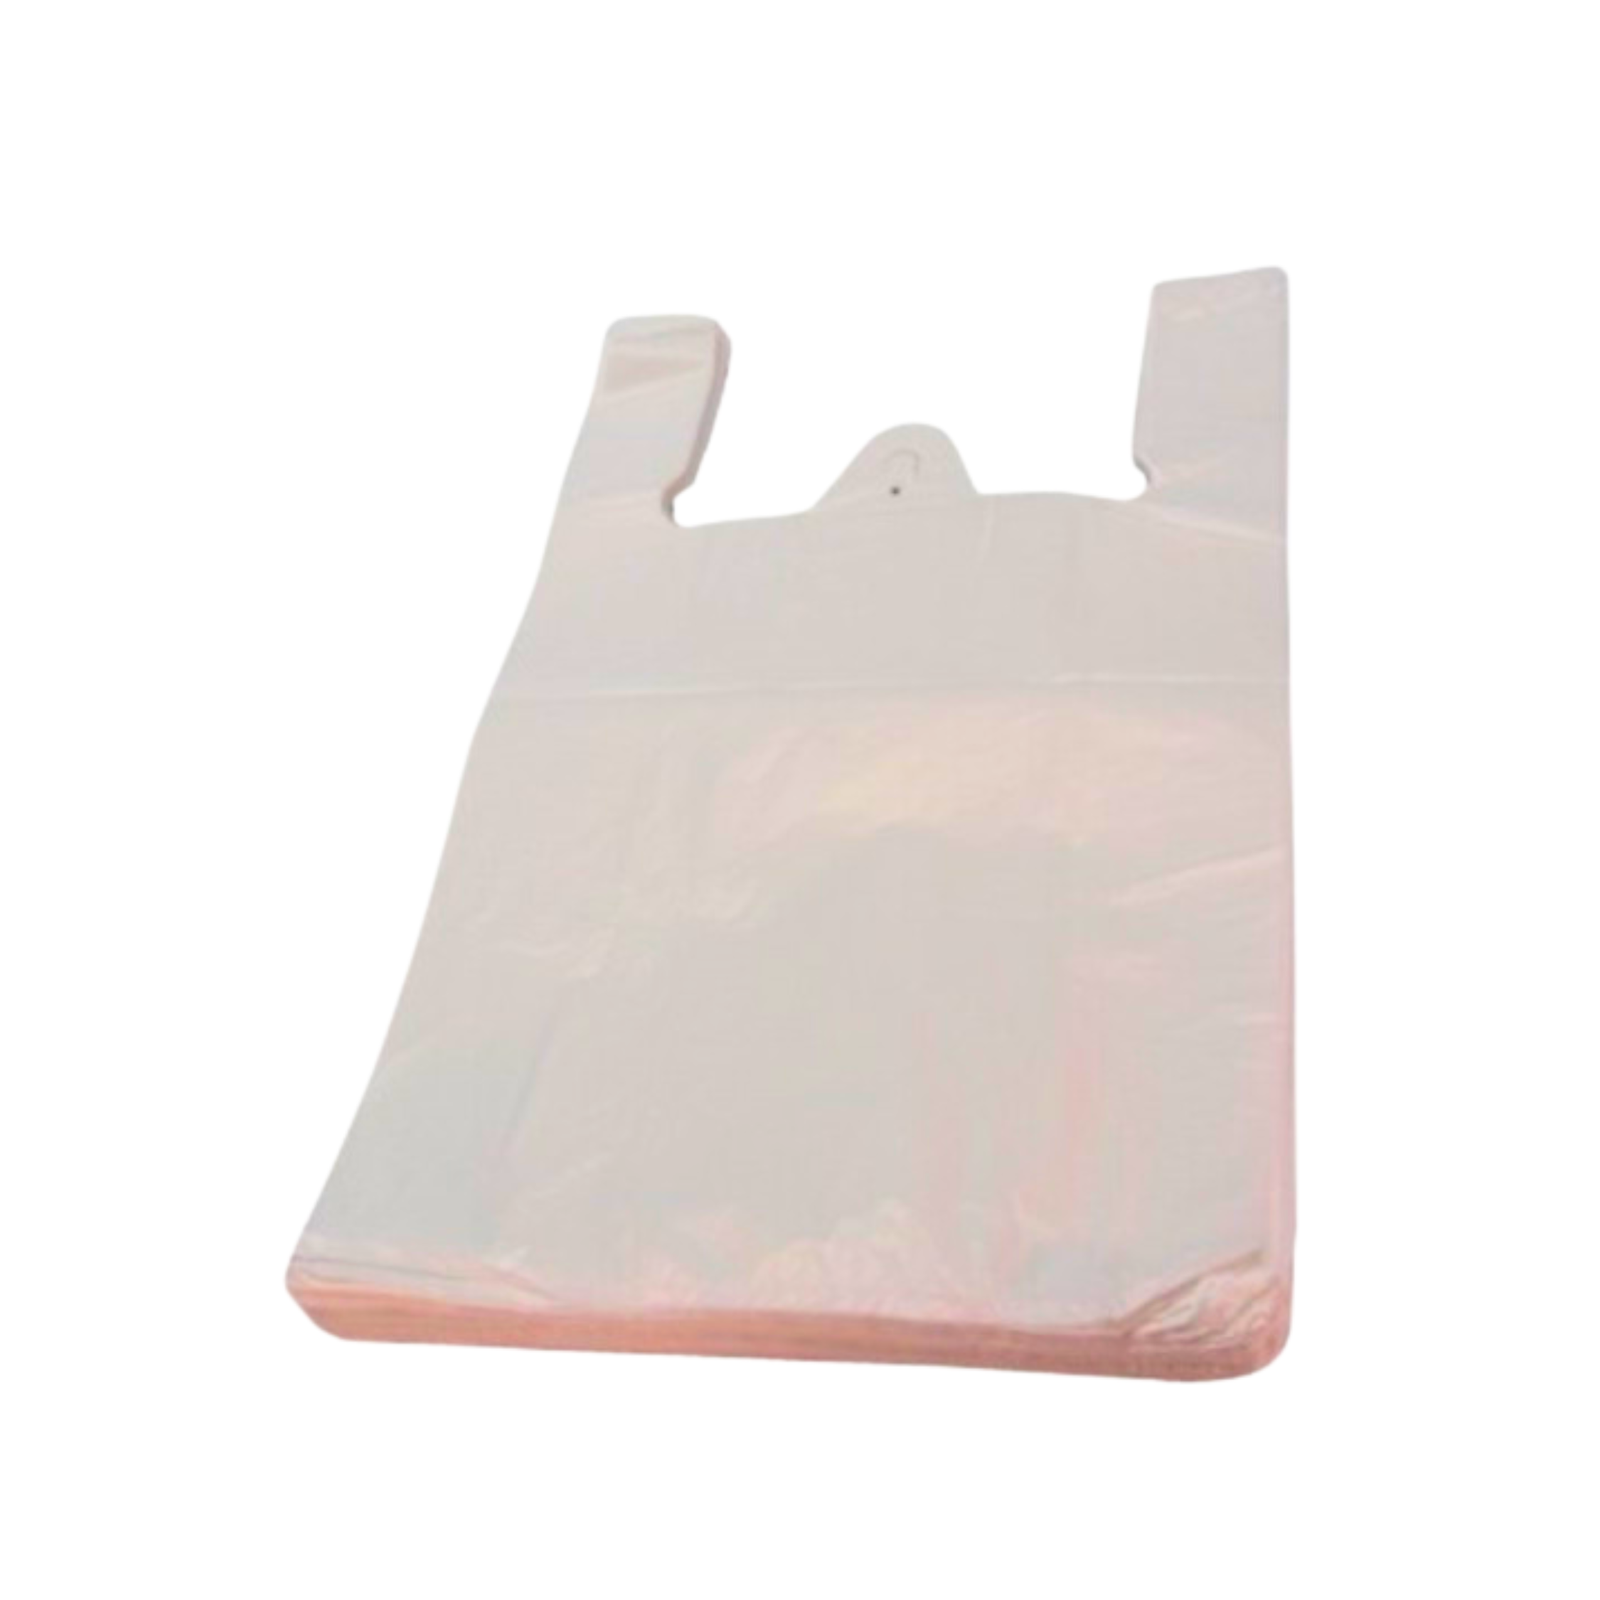 White Vest Style Plastic Carrier Bags - 13 x 19 x 23 - (1 box = 100 bags) -  HEAVY DUTY by N / A : : Business, Industry & Science